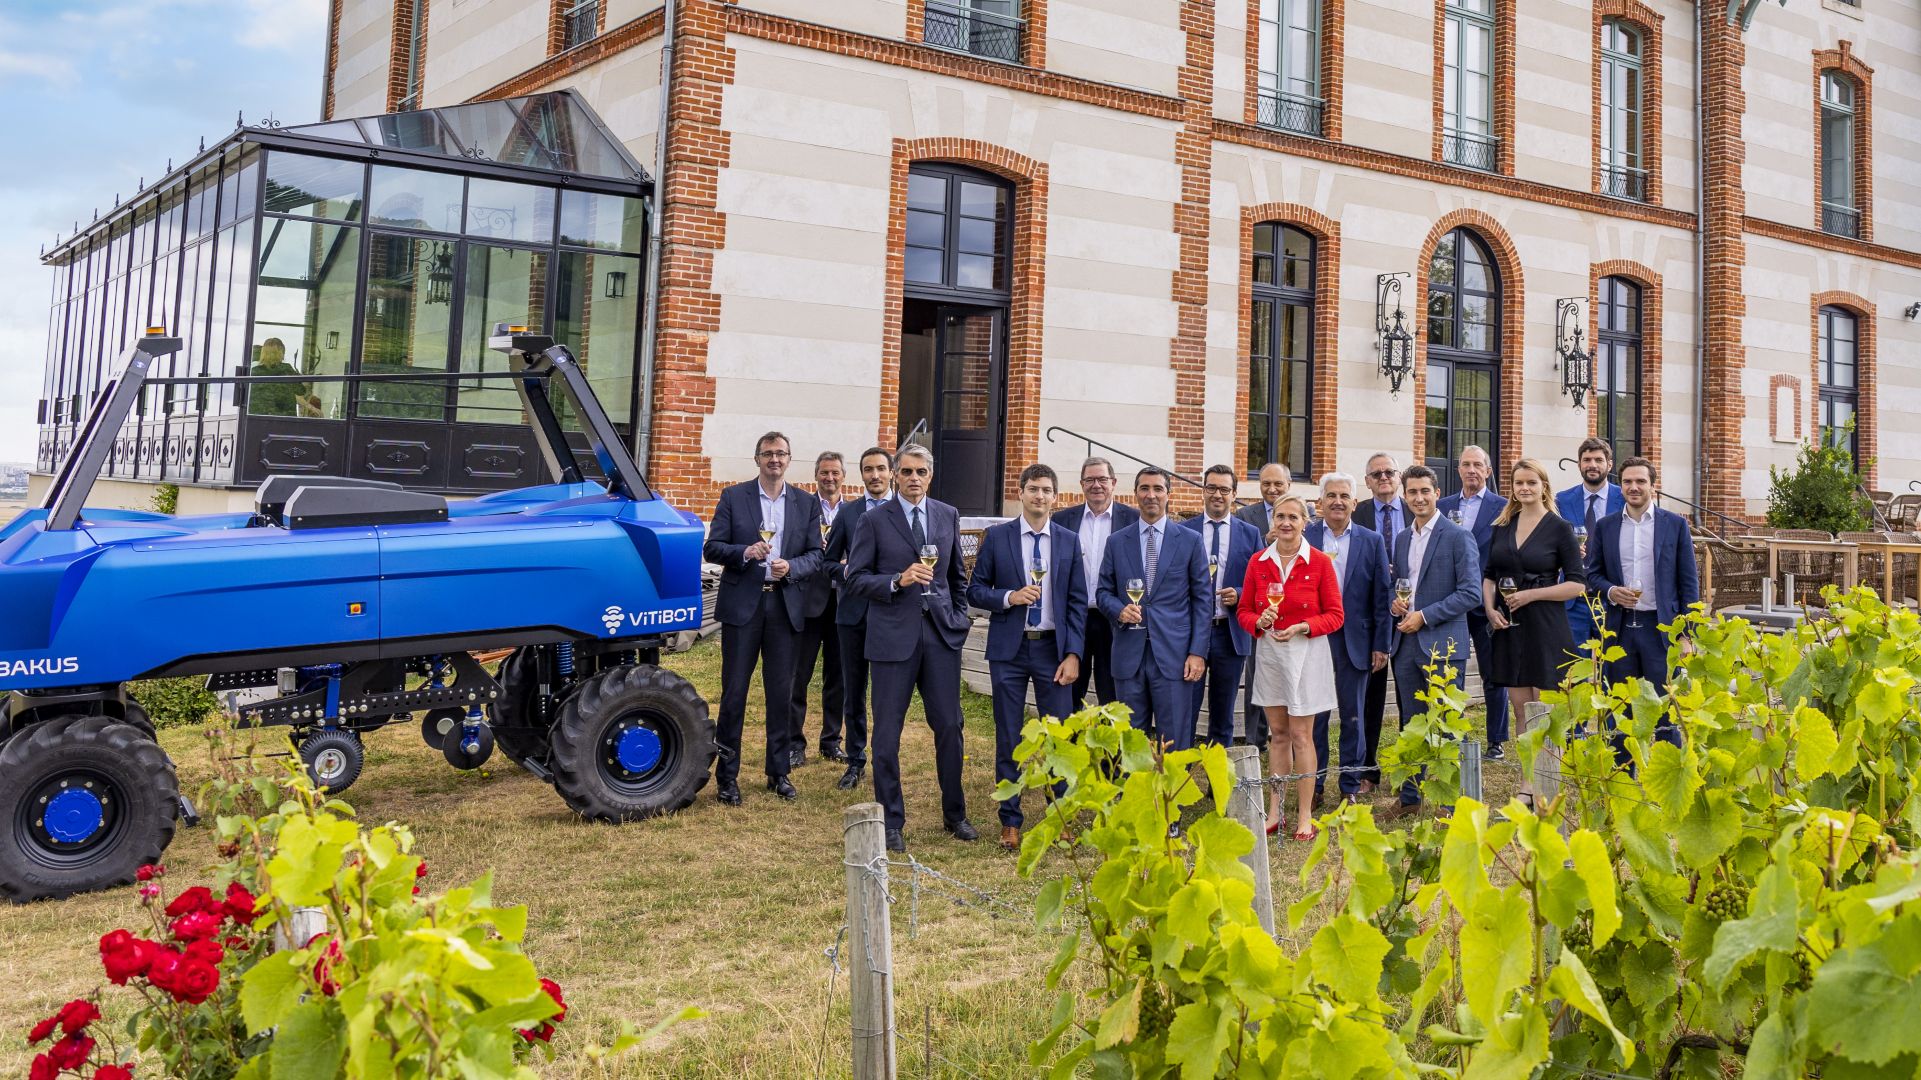 SAME Deutz Fahr has acquired a majority stake in VitiBot